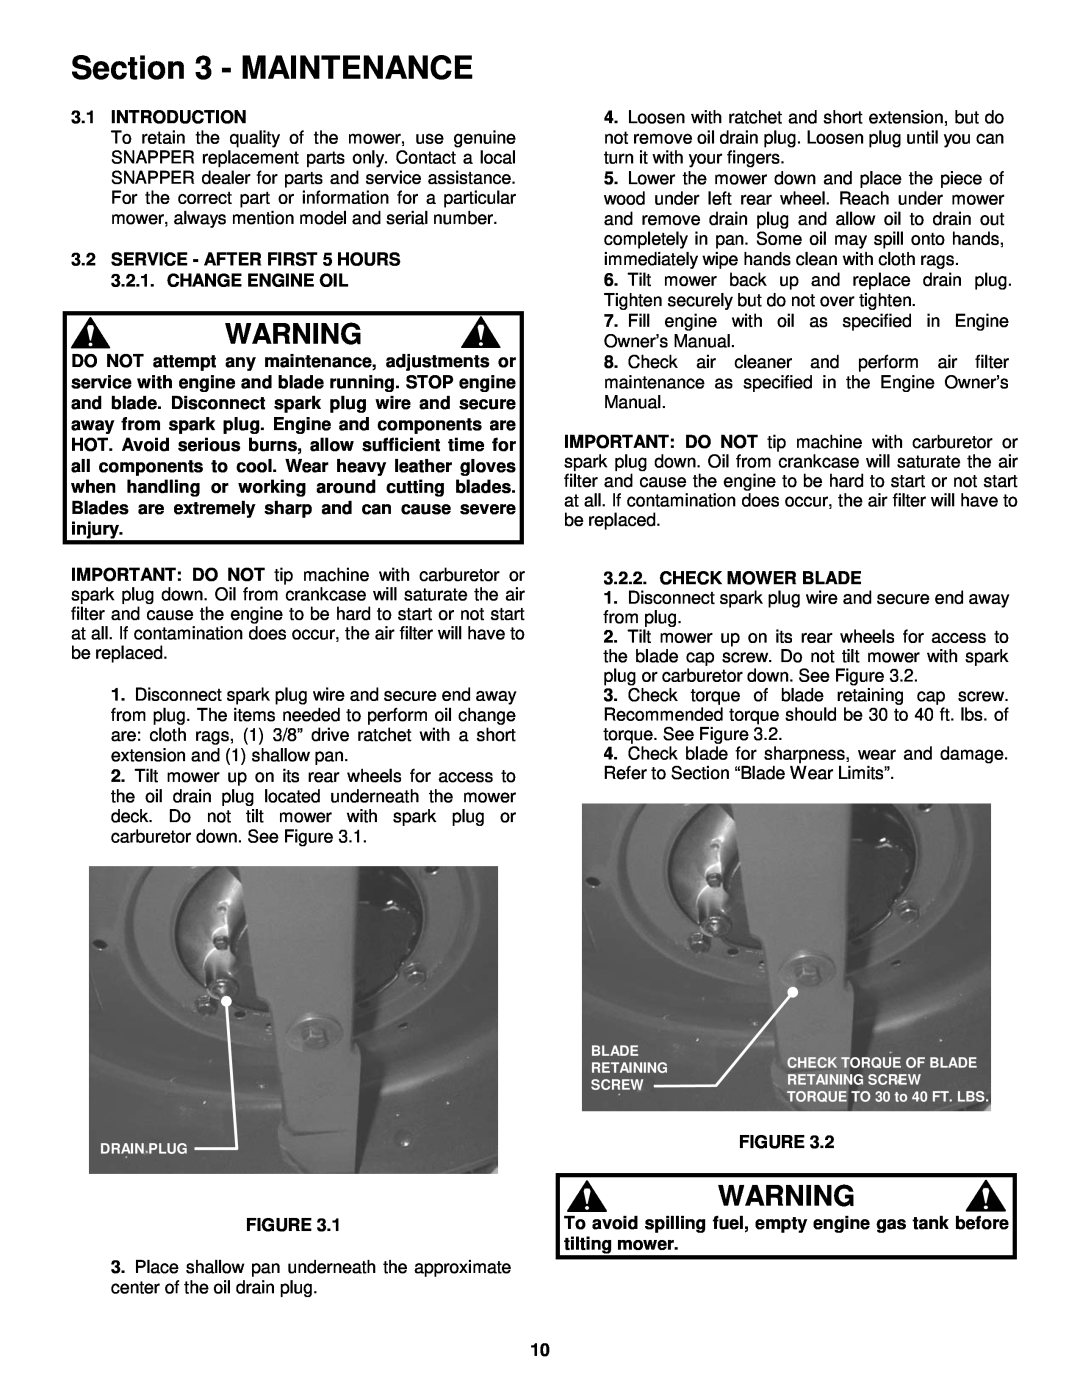 Snapper R195517B important safety instructions Maintenance, 3.1INTRODUCTION, Check Mower Blade 